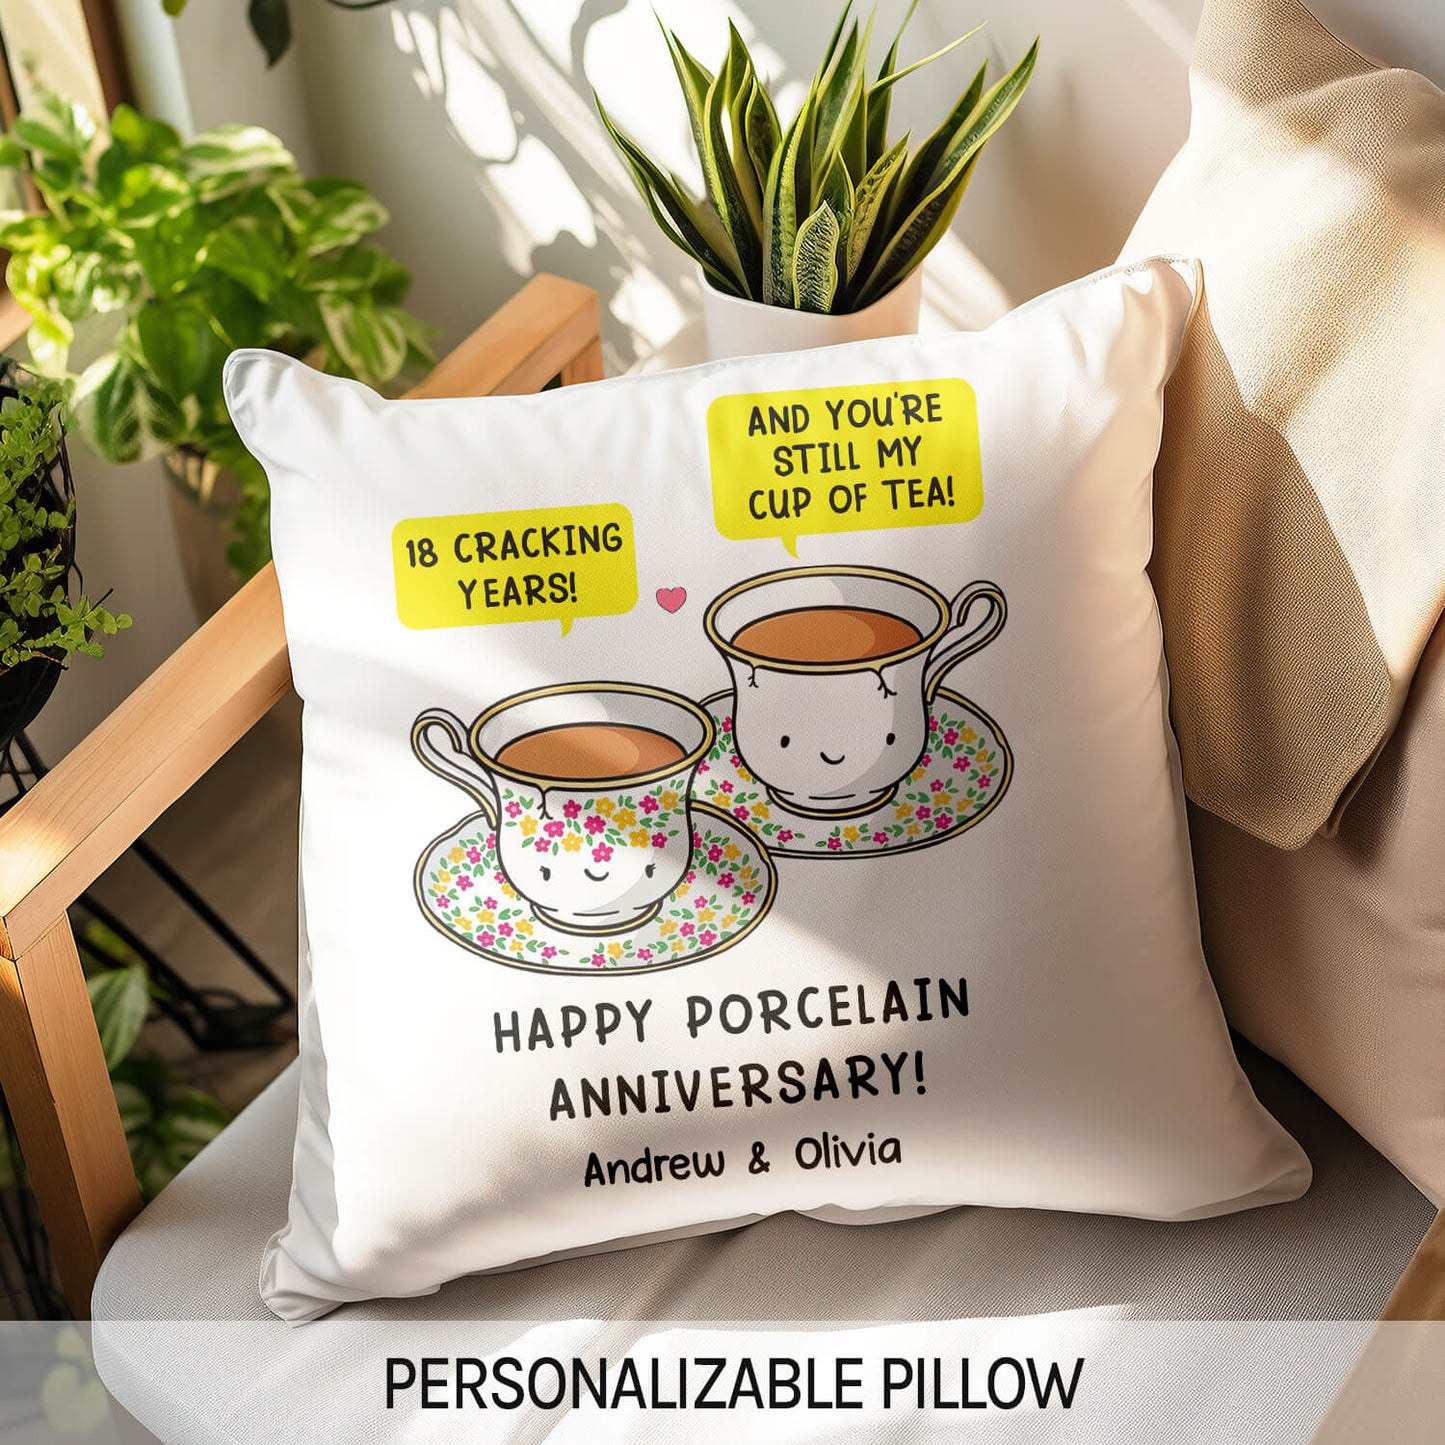 18 Cracking Years - Personalized 18 Year Anniversary gift For Husband or Wife - Custom Pillow - MyMindfulGifts